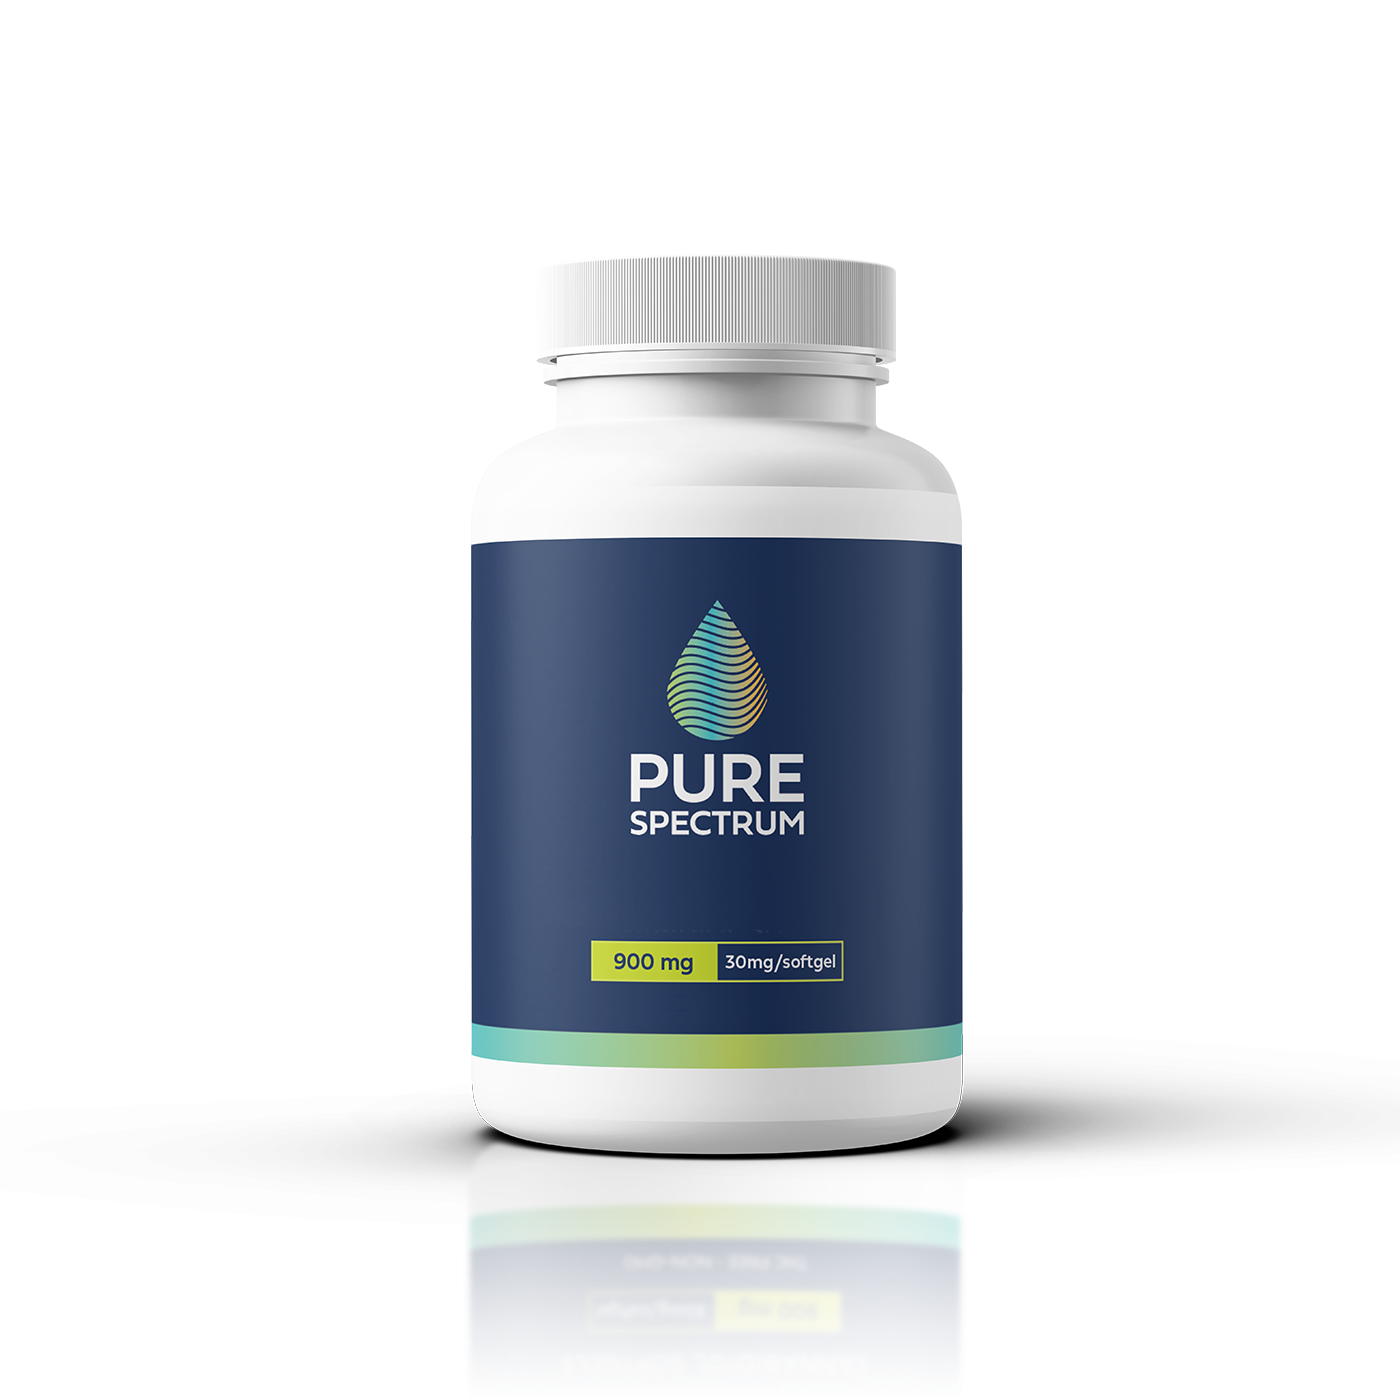 A bottle of Pure Spectrum softgel capsules with 900 mg dosage information.